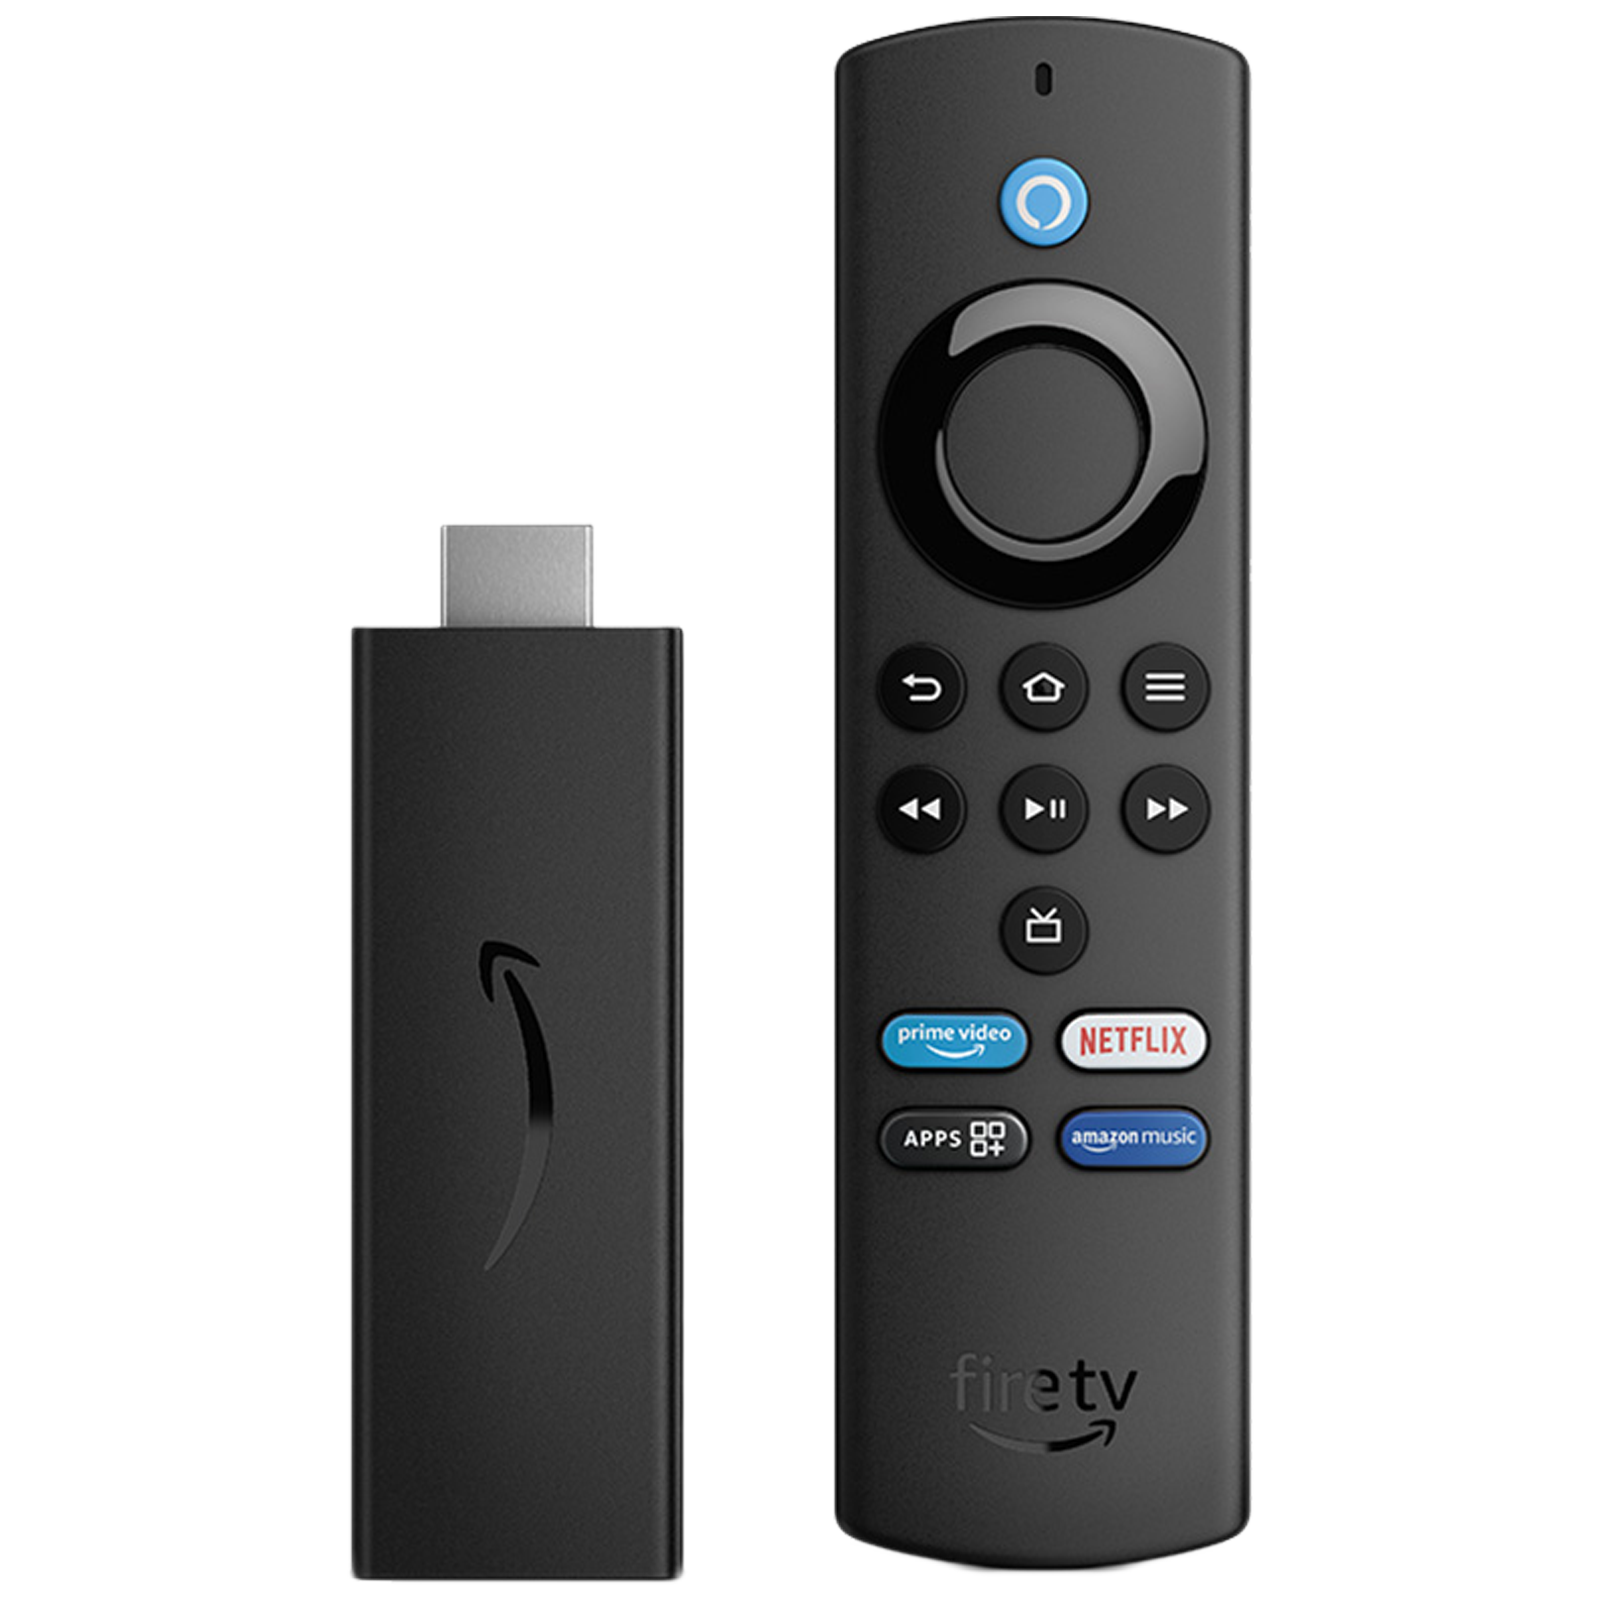 Amazon Fire TV Stick Lite with Alexa Voice Remote (Full HD Video Steaming, B09BY17DLV, Black)_1